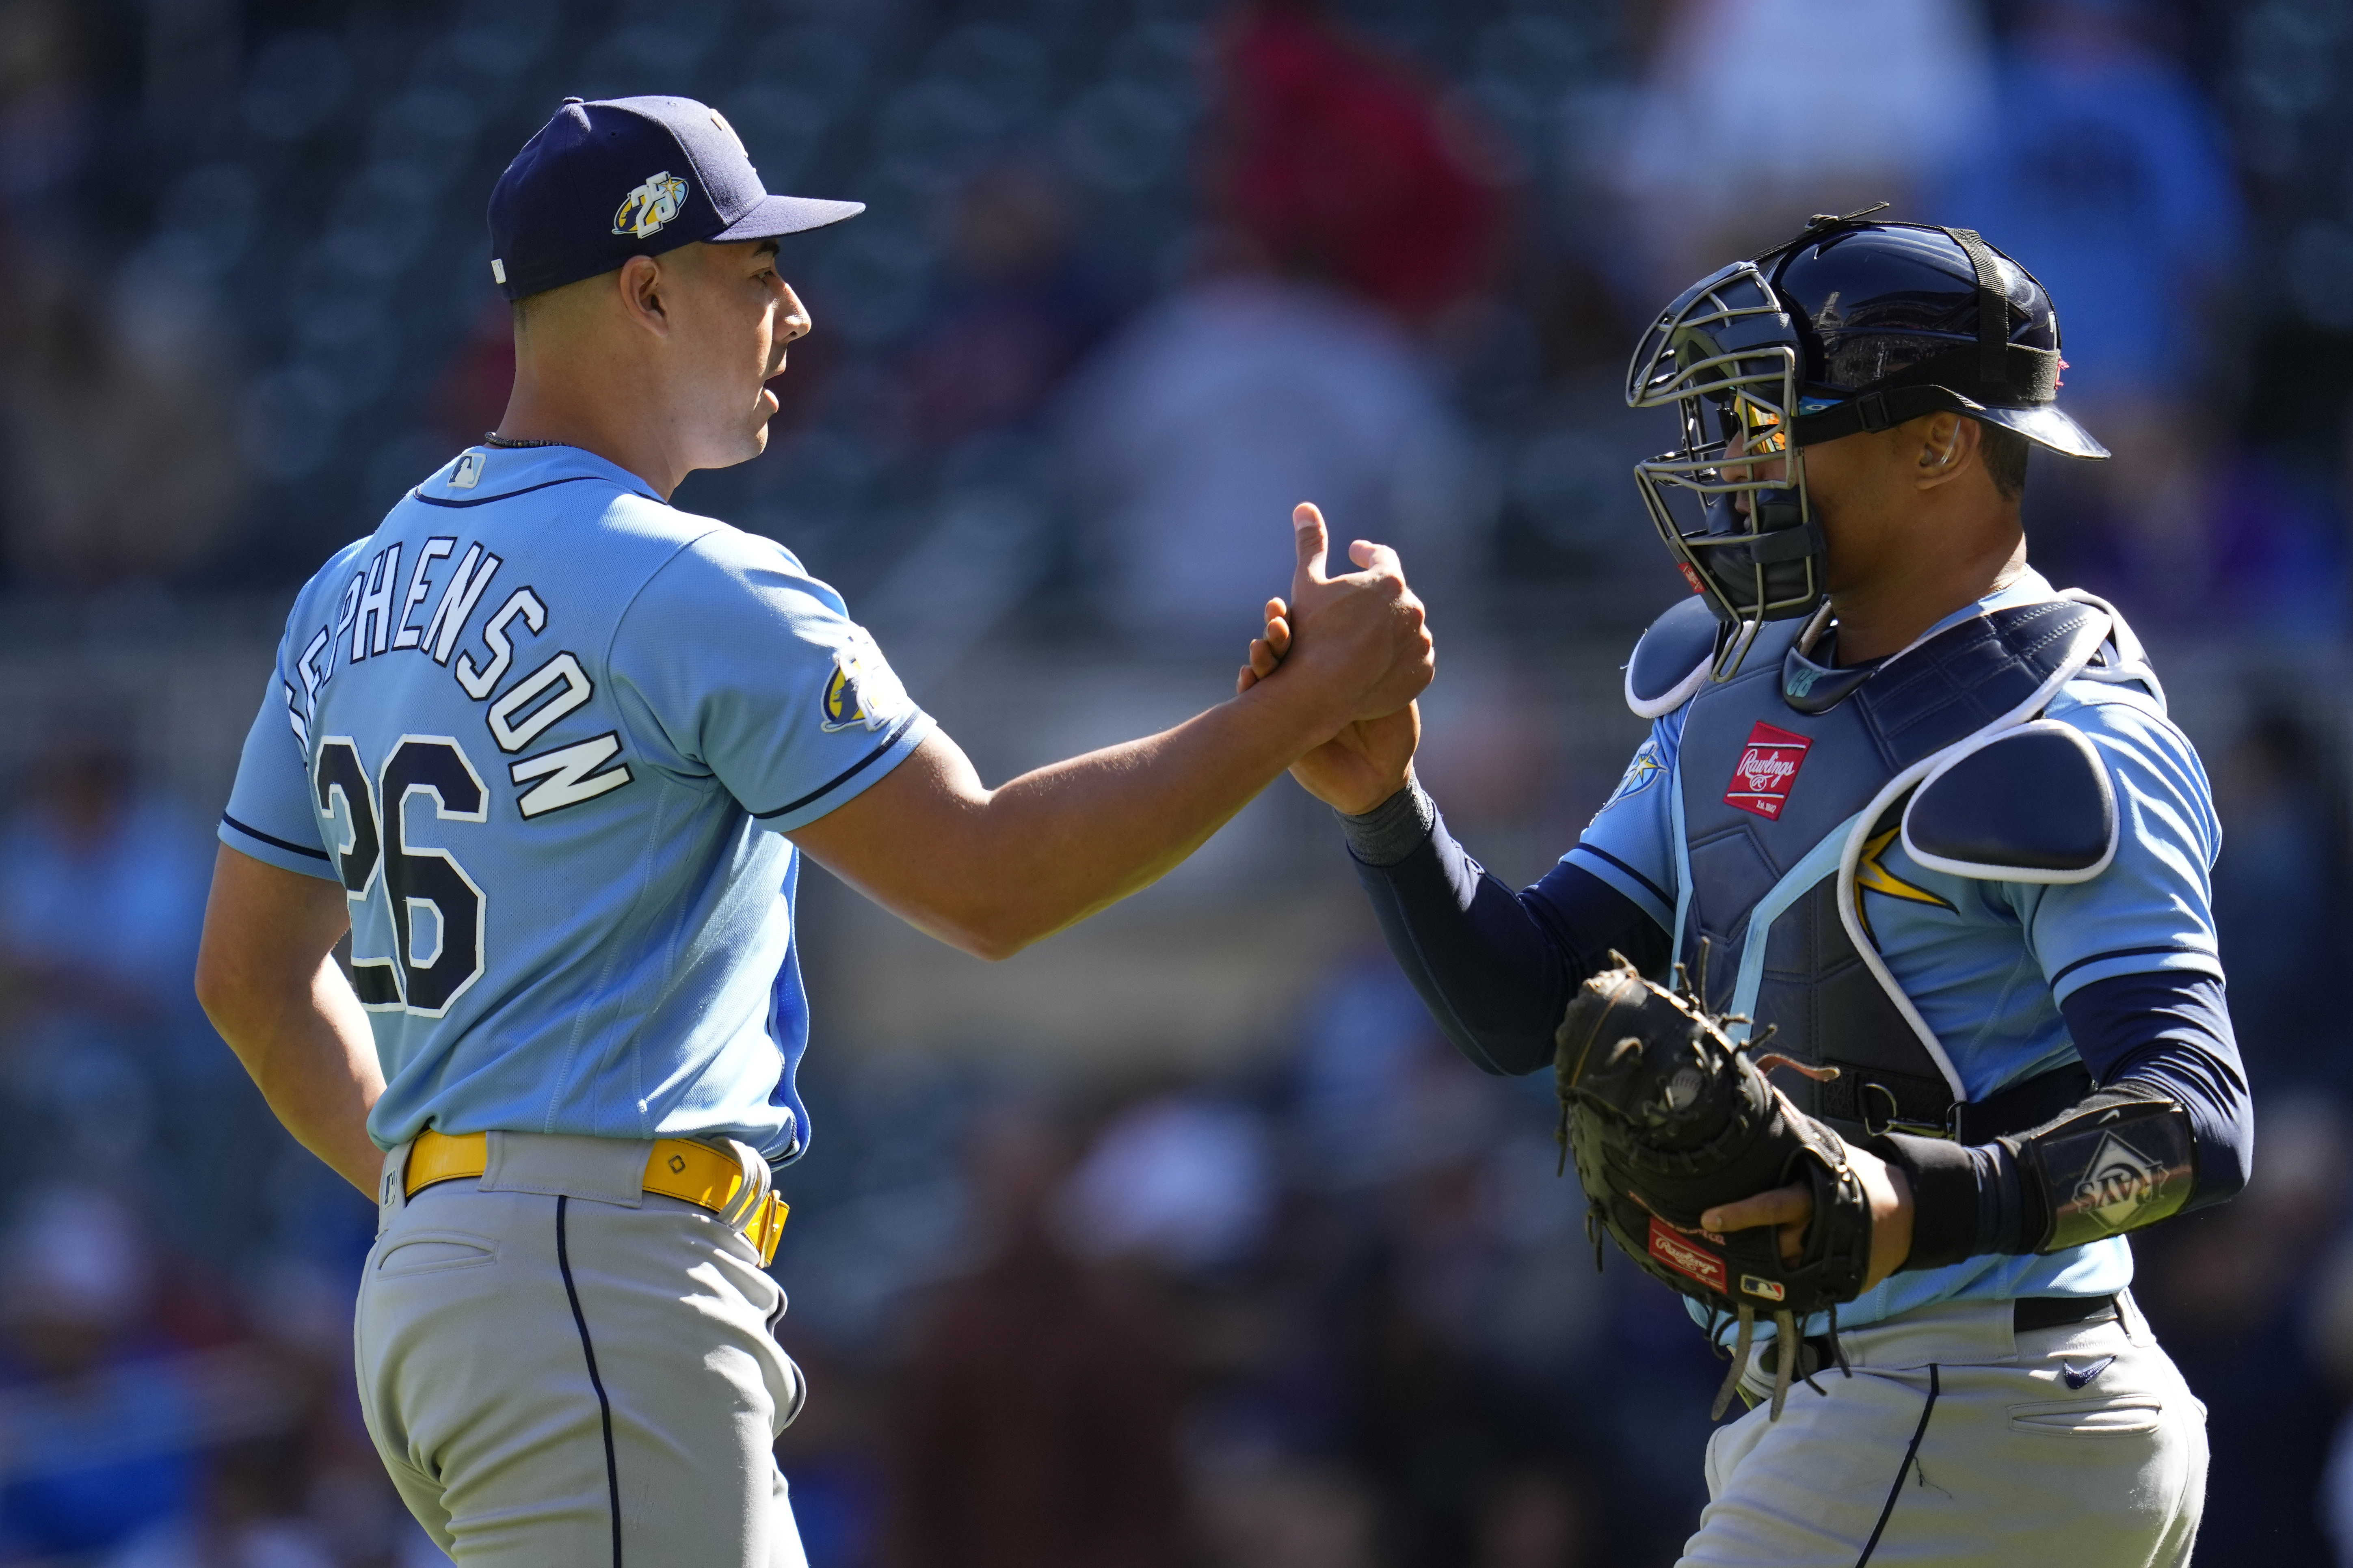 Breaking Down the 13-0 Rays